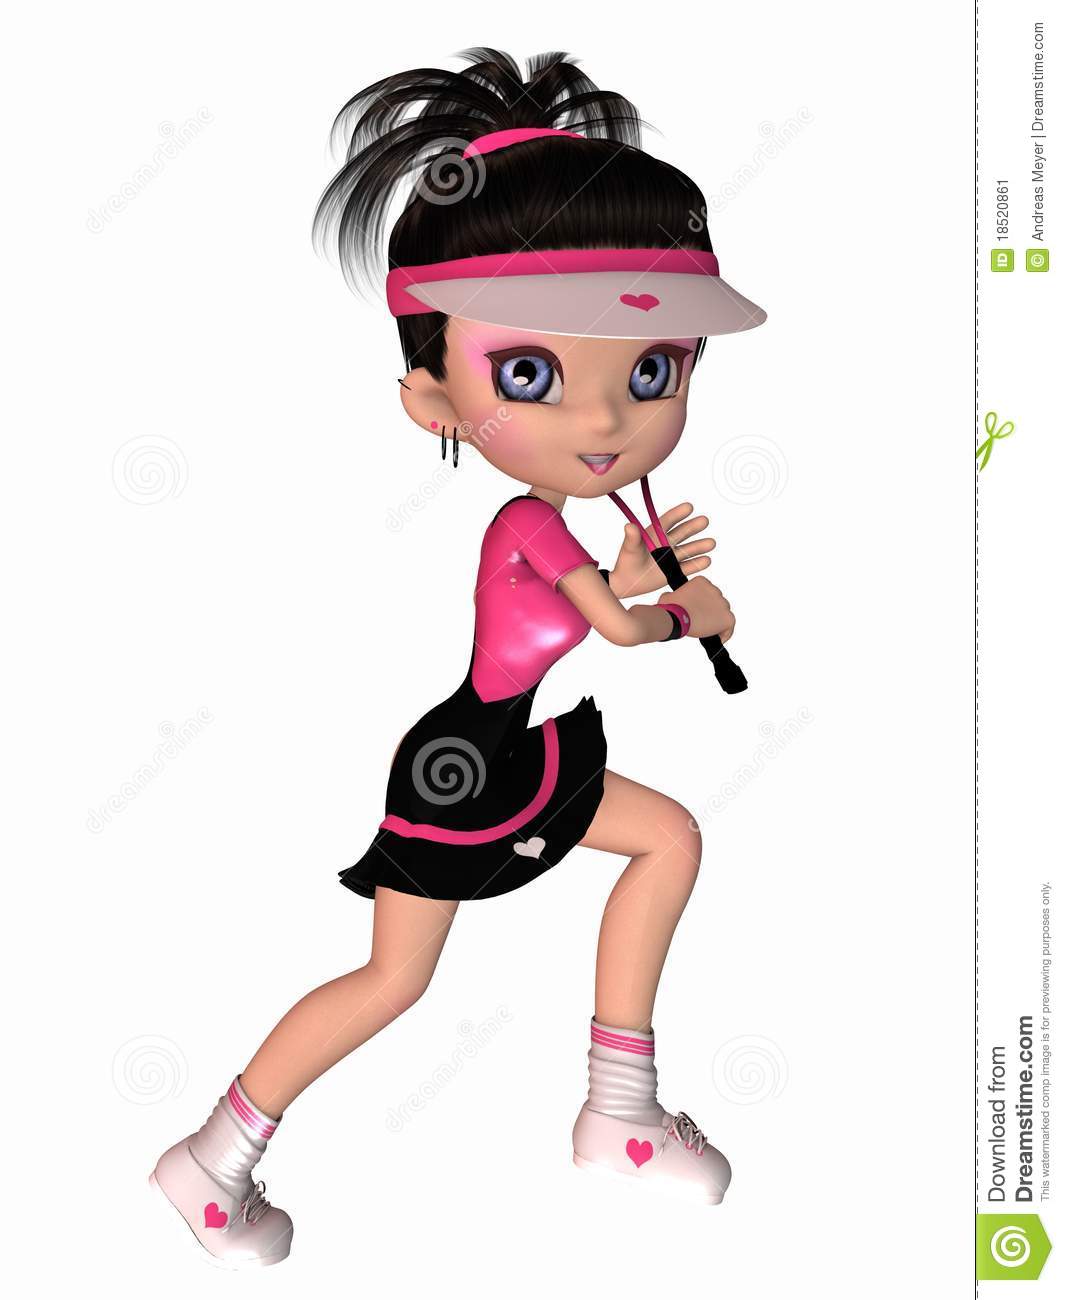 Cute Tennis Player Stock Image   Image  18520861